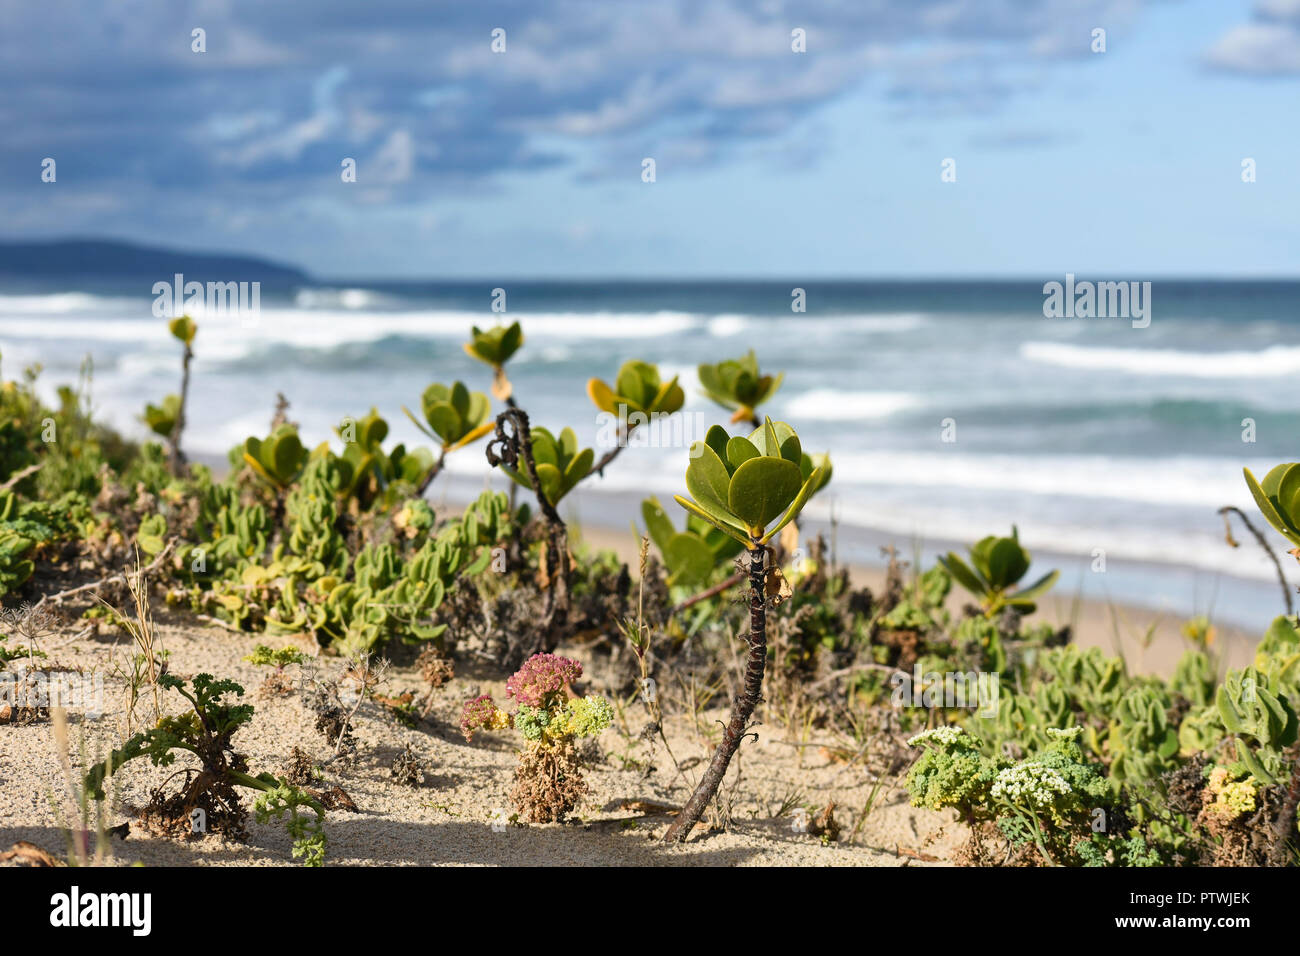 Towering Beachberry (scaevola plumieri) Stems On Beach Dune With A Stormy Ocean Shore Horizon In The Distance Stock Photo